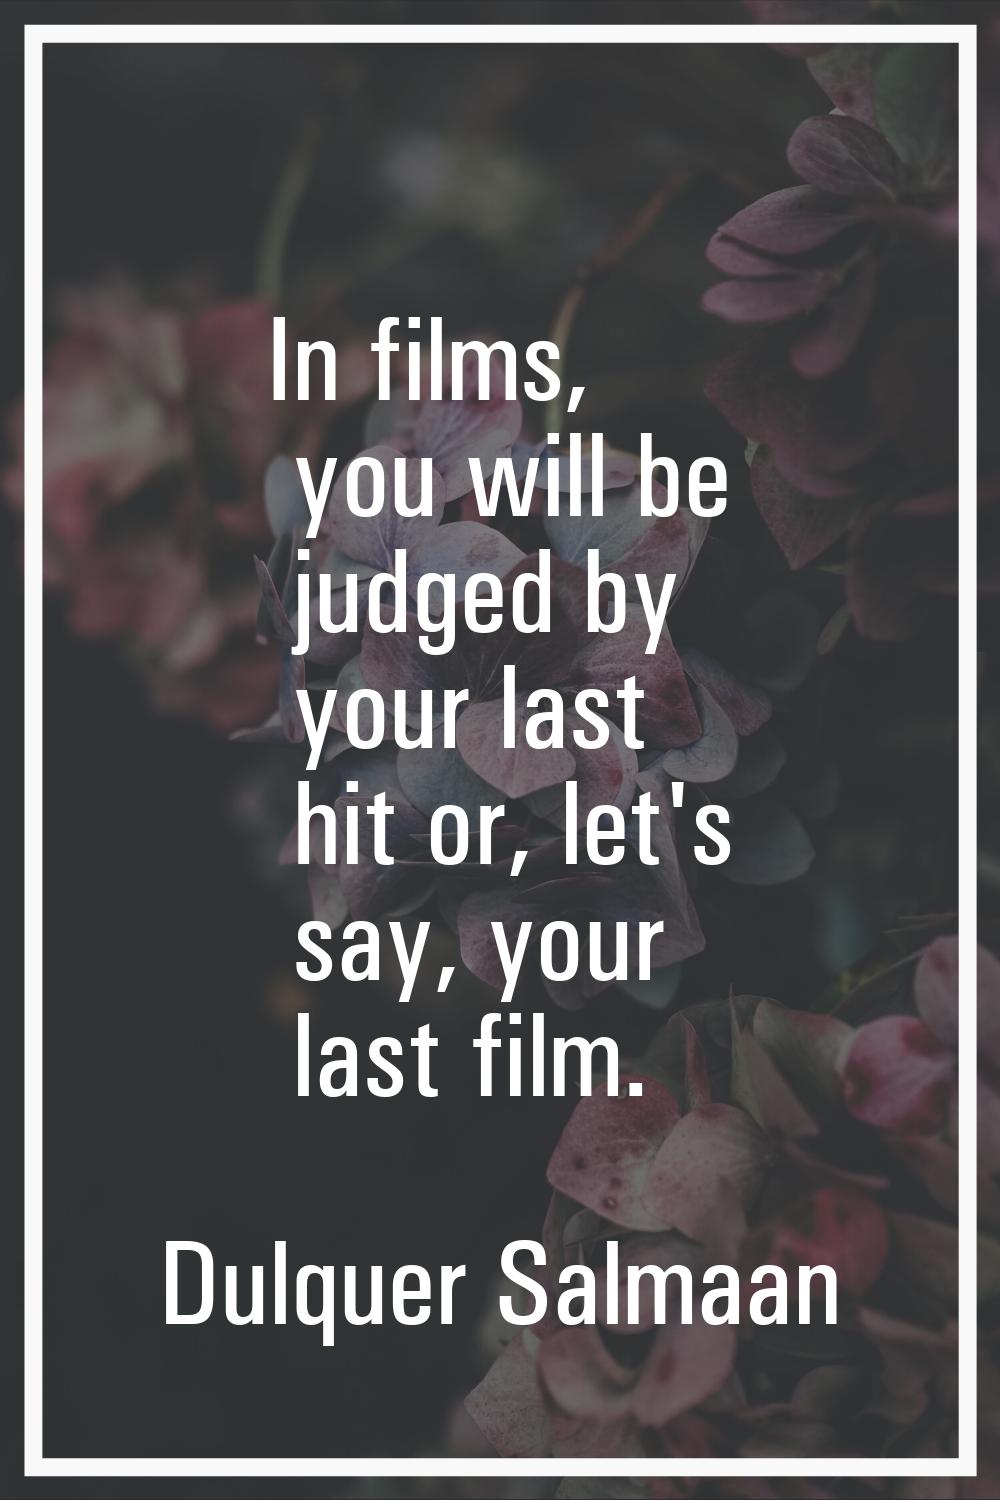 In films, you will be judged by your last hit or, let's say, your last film.